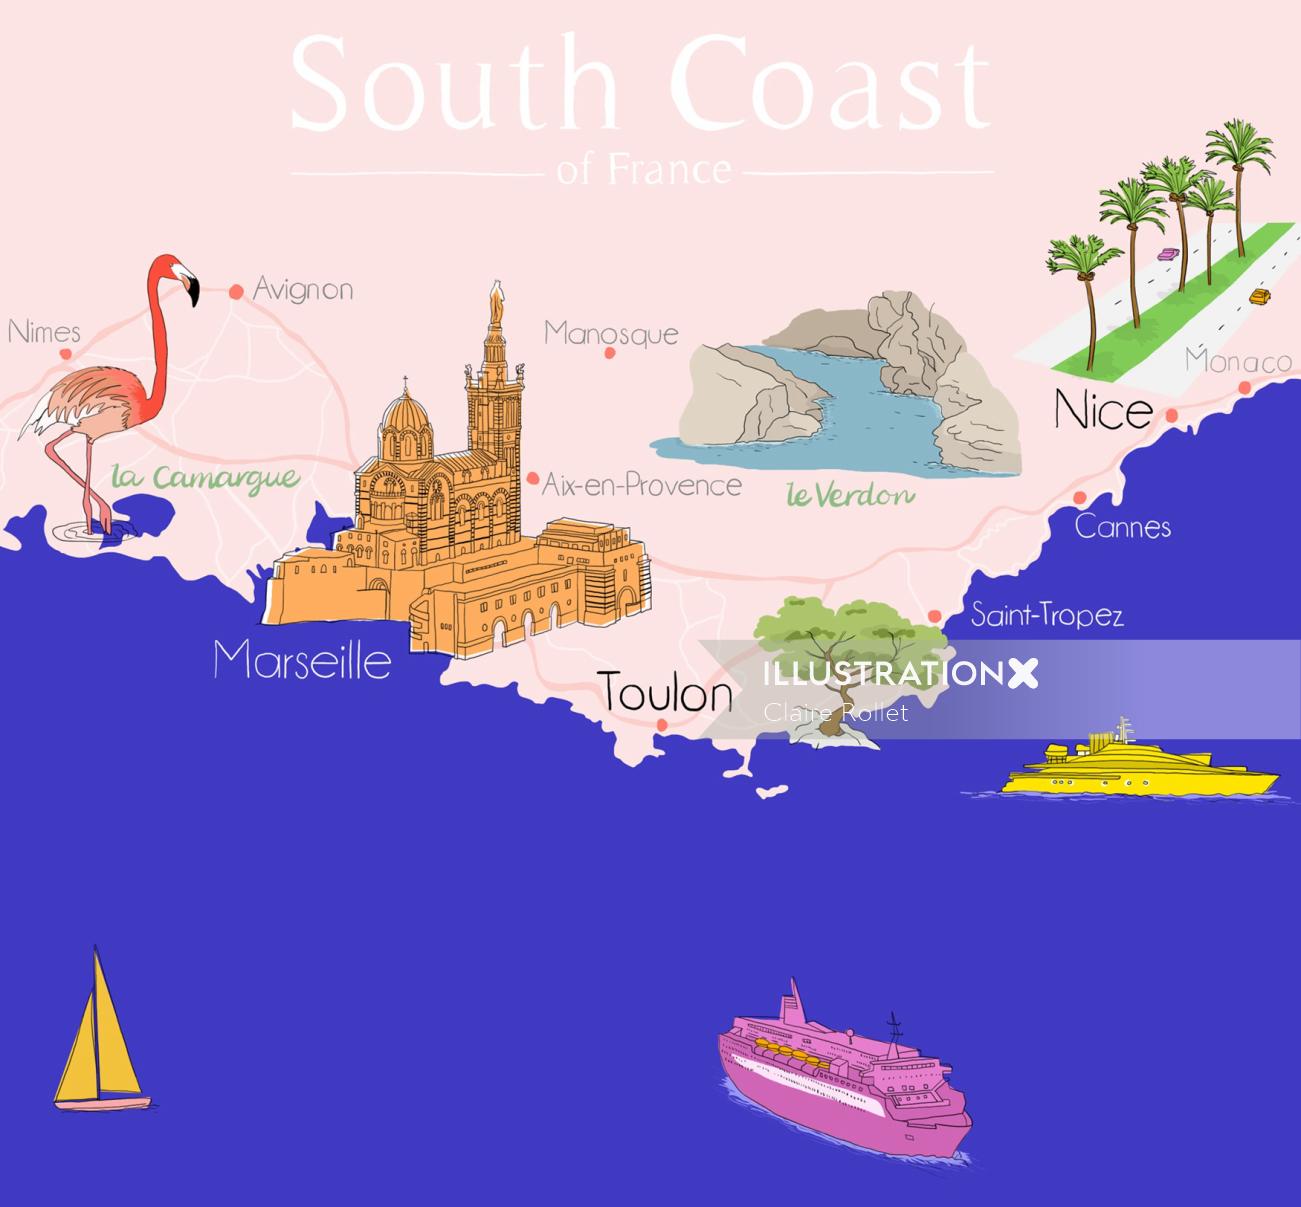 The main places and locations on France's South Coast